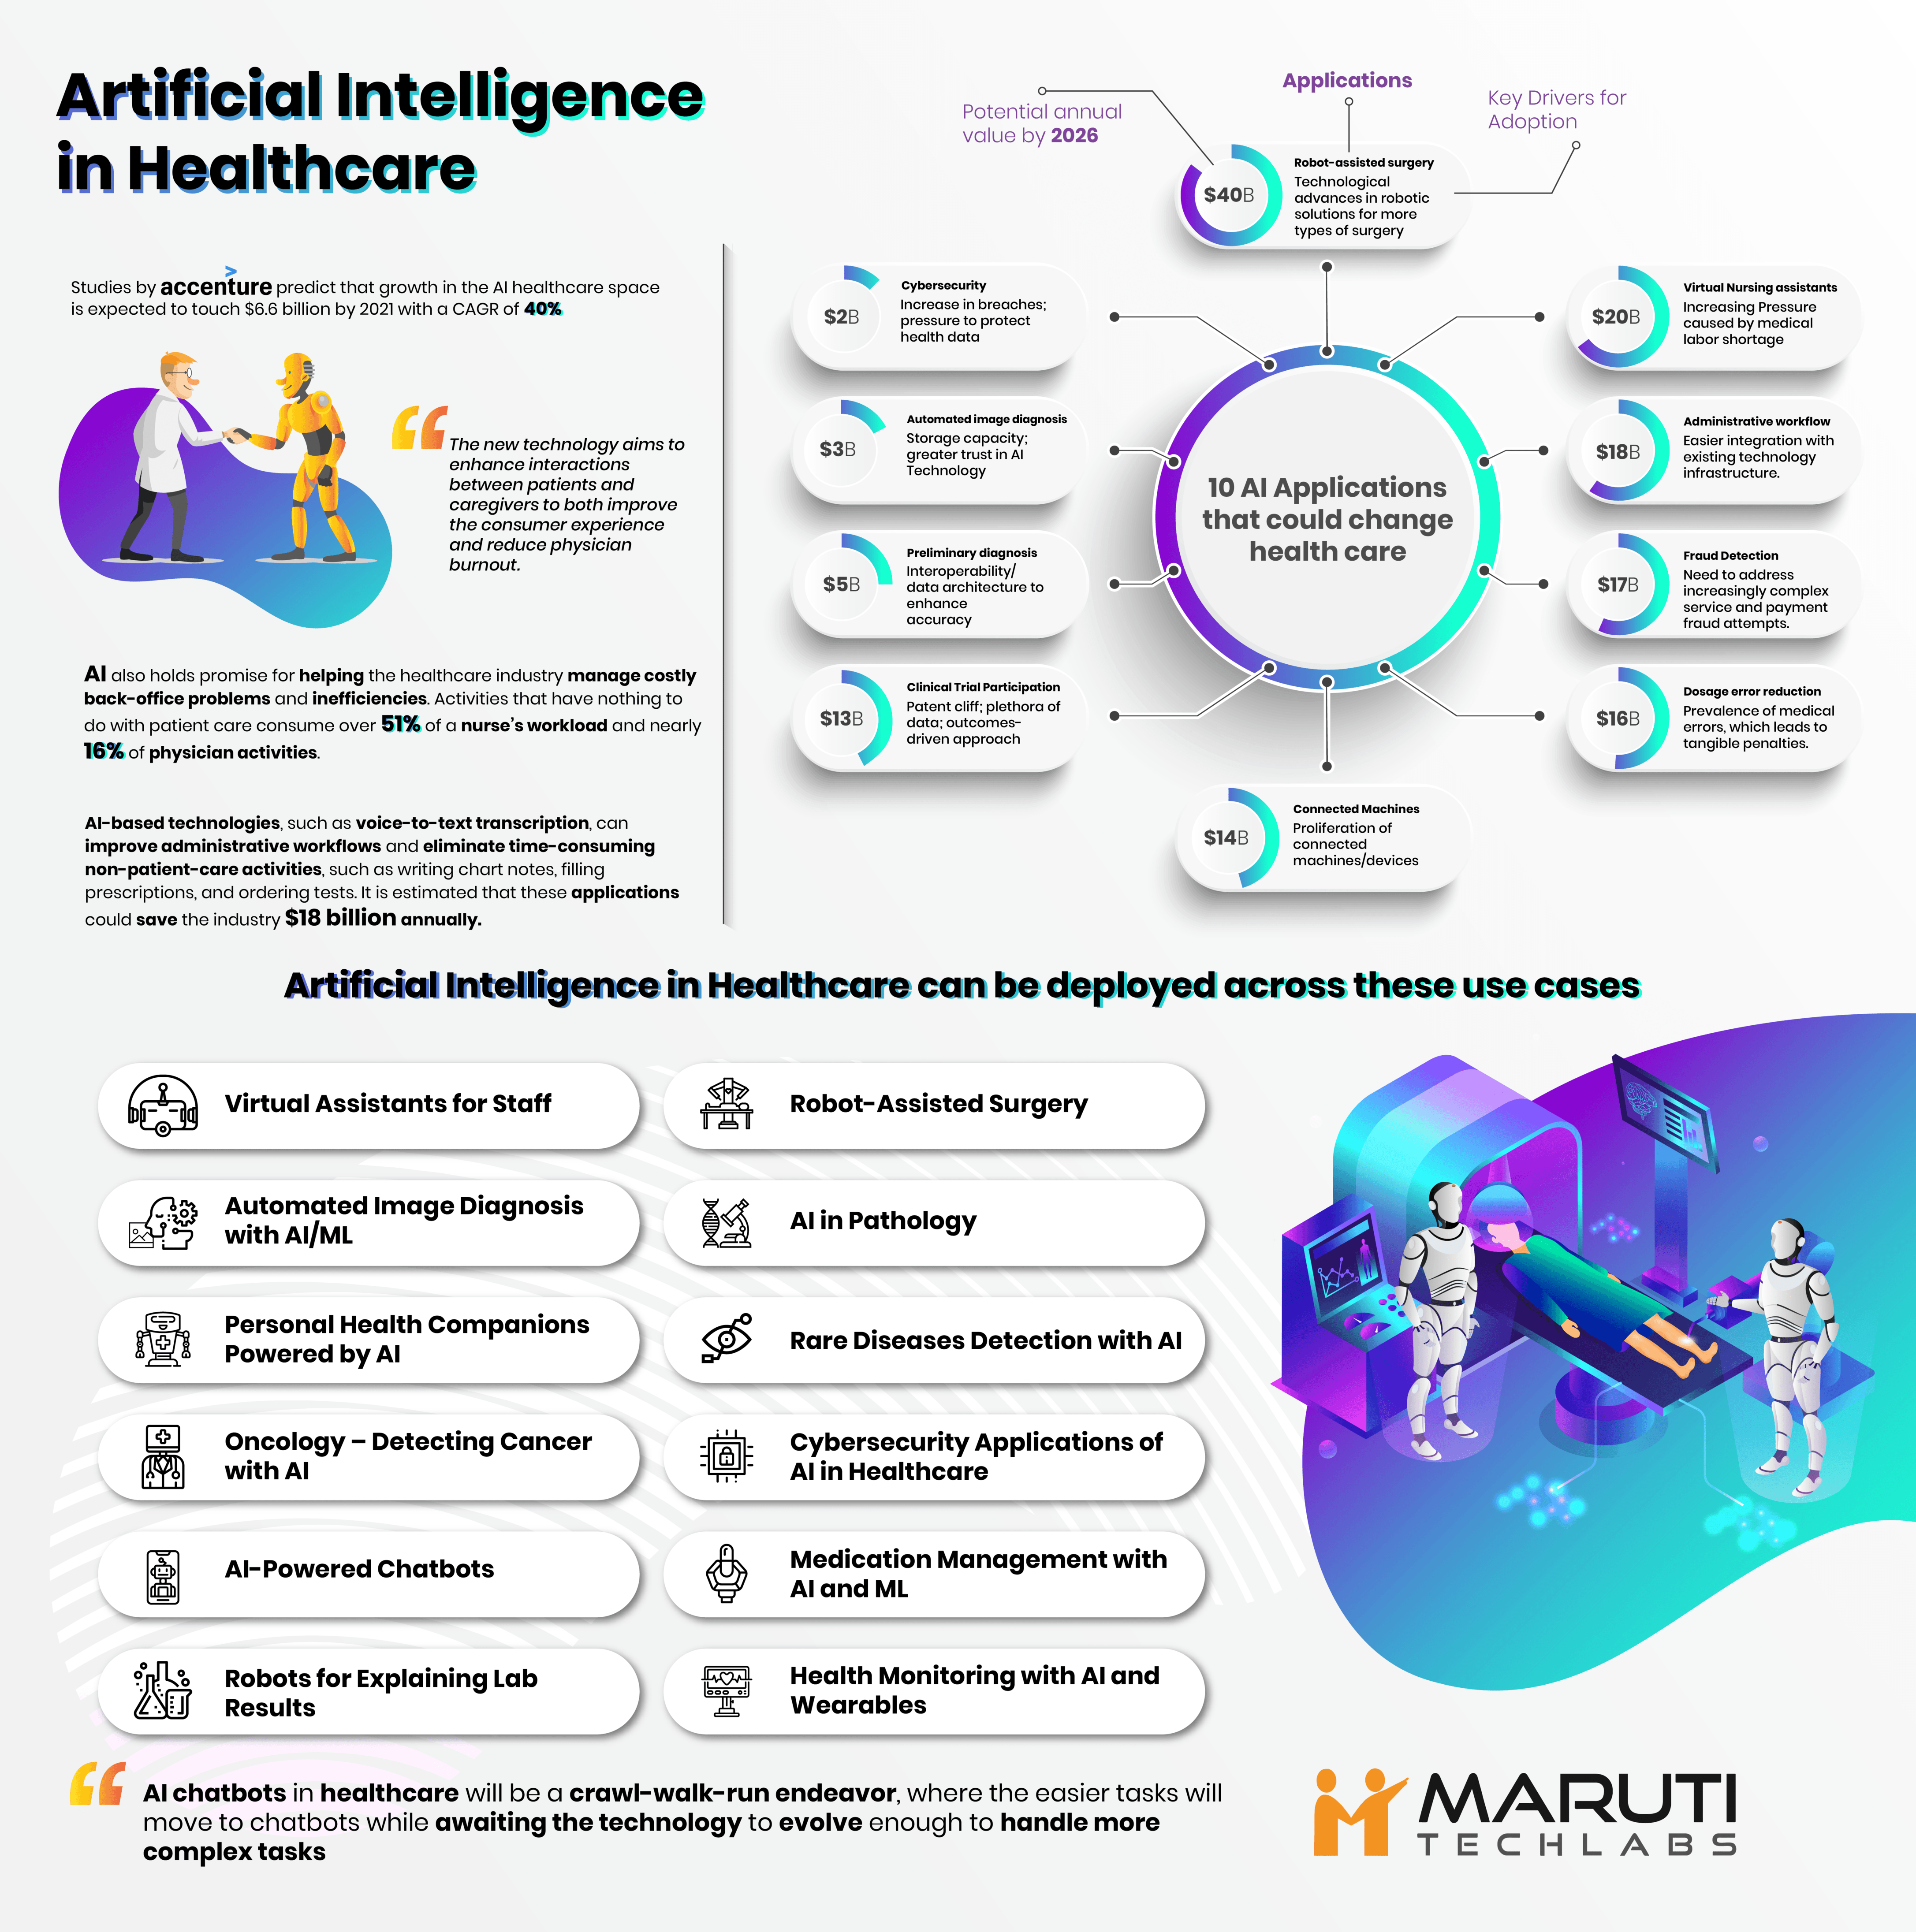 Everything you need to know about Artificial Intelligence in Healthcare